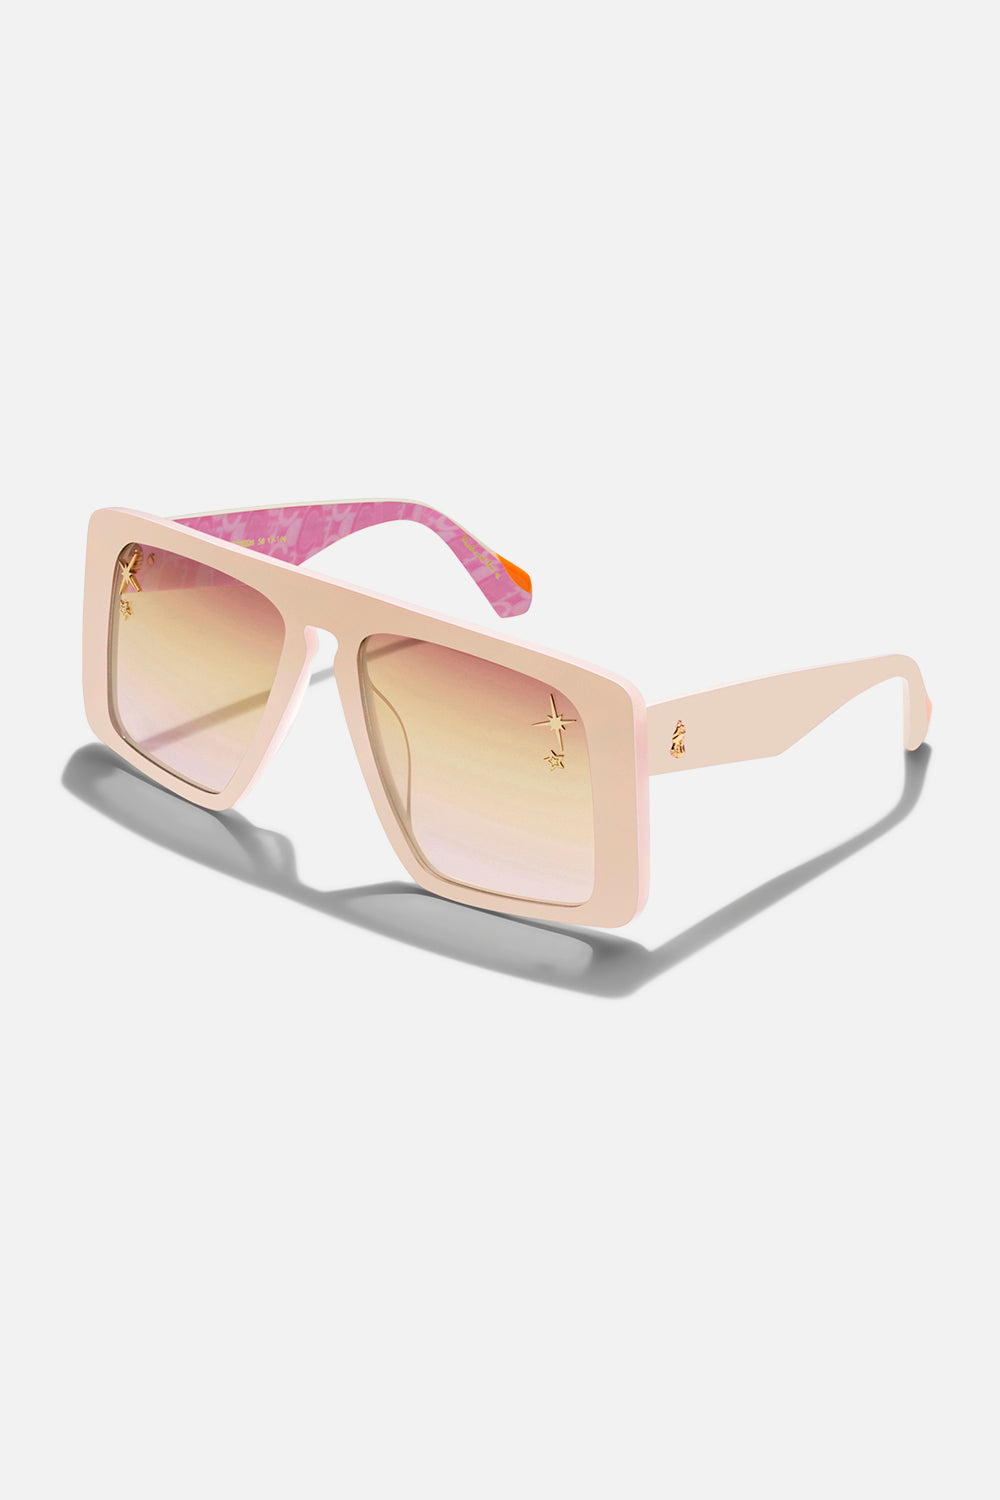 Fully Booked oversized pink sunglasses by CAMILLA